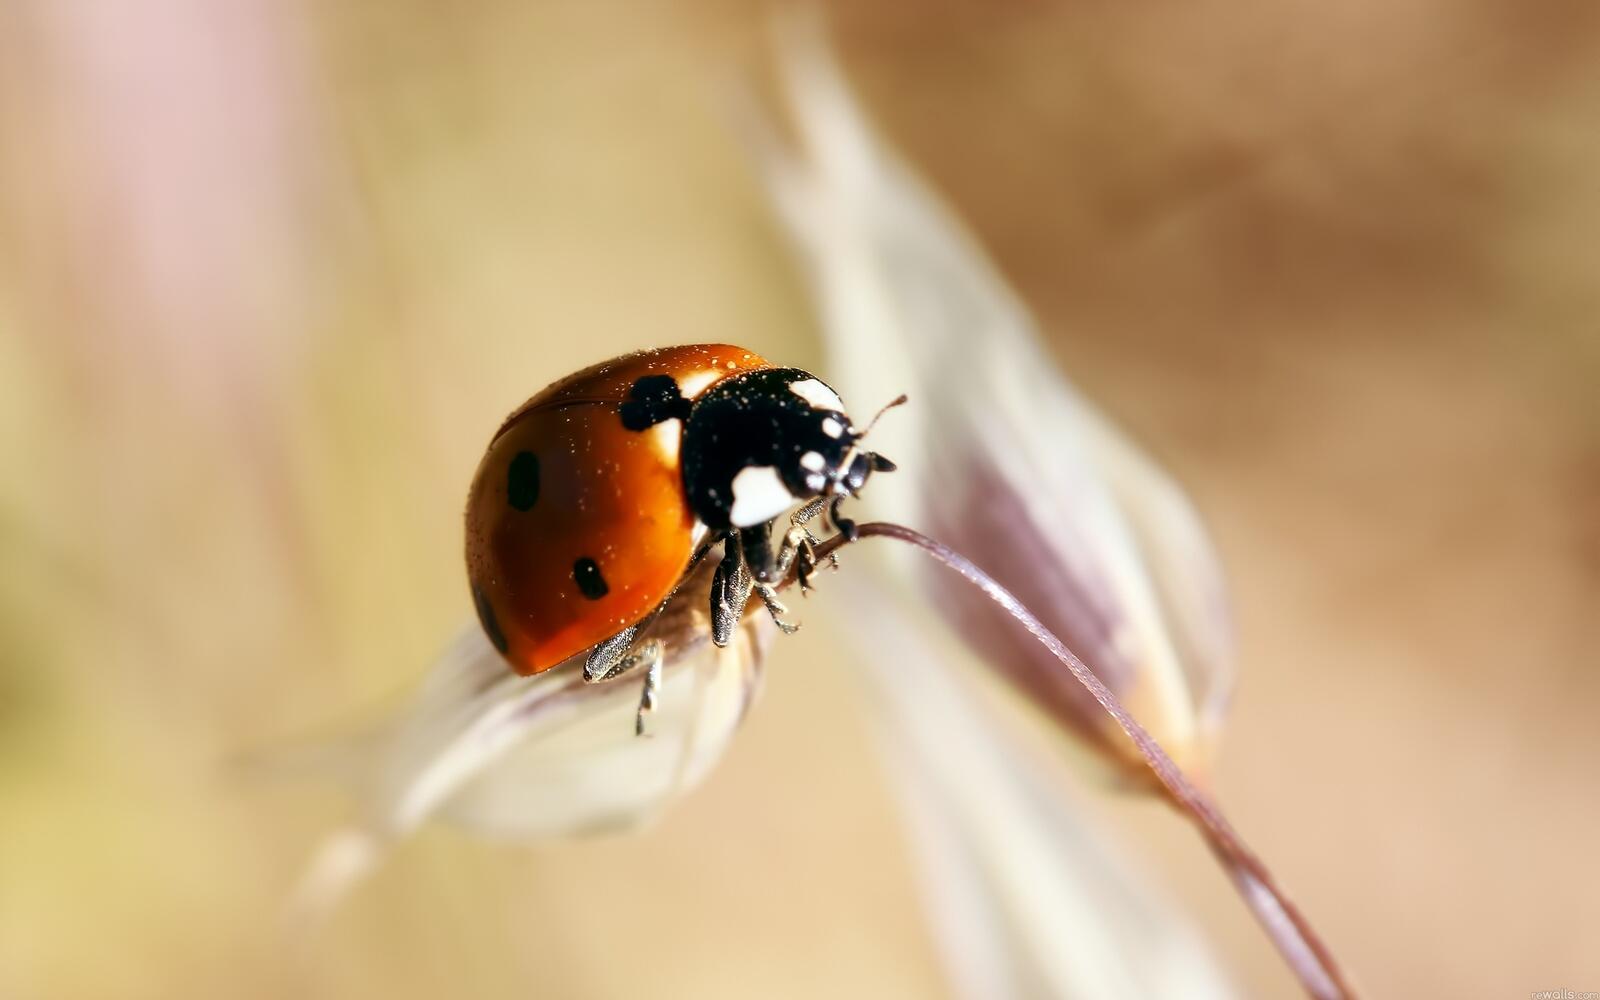 Wallpapers ladybug insect close-up on the desktop